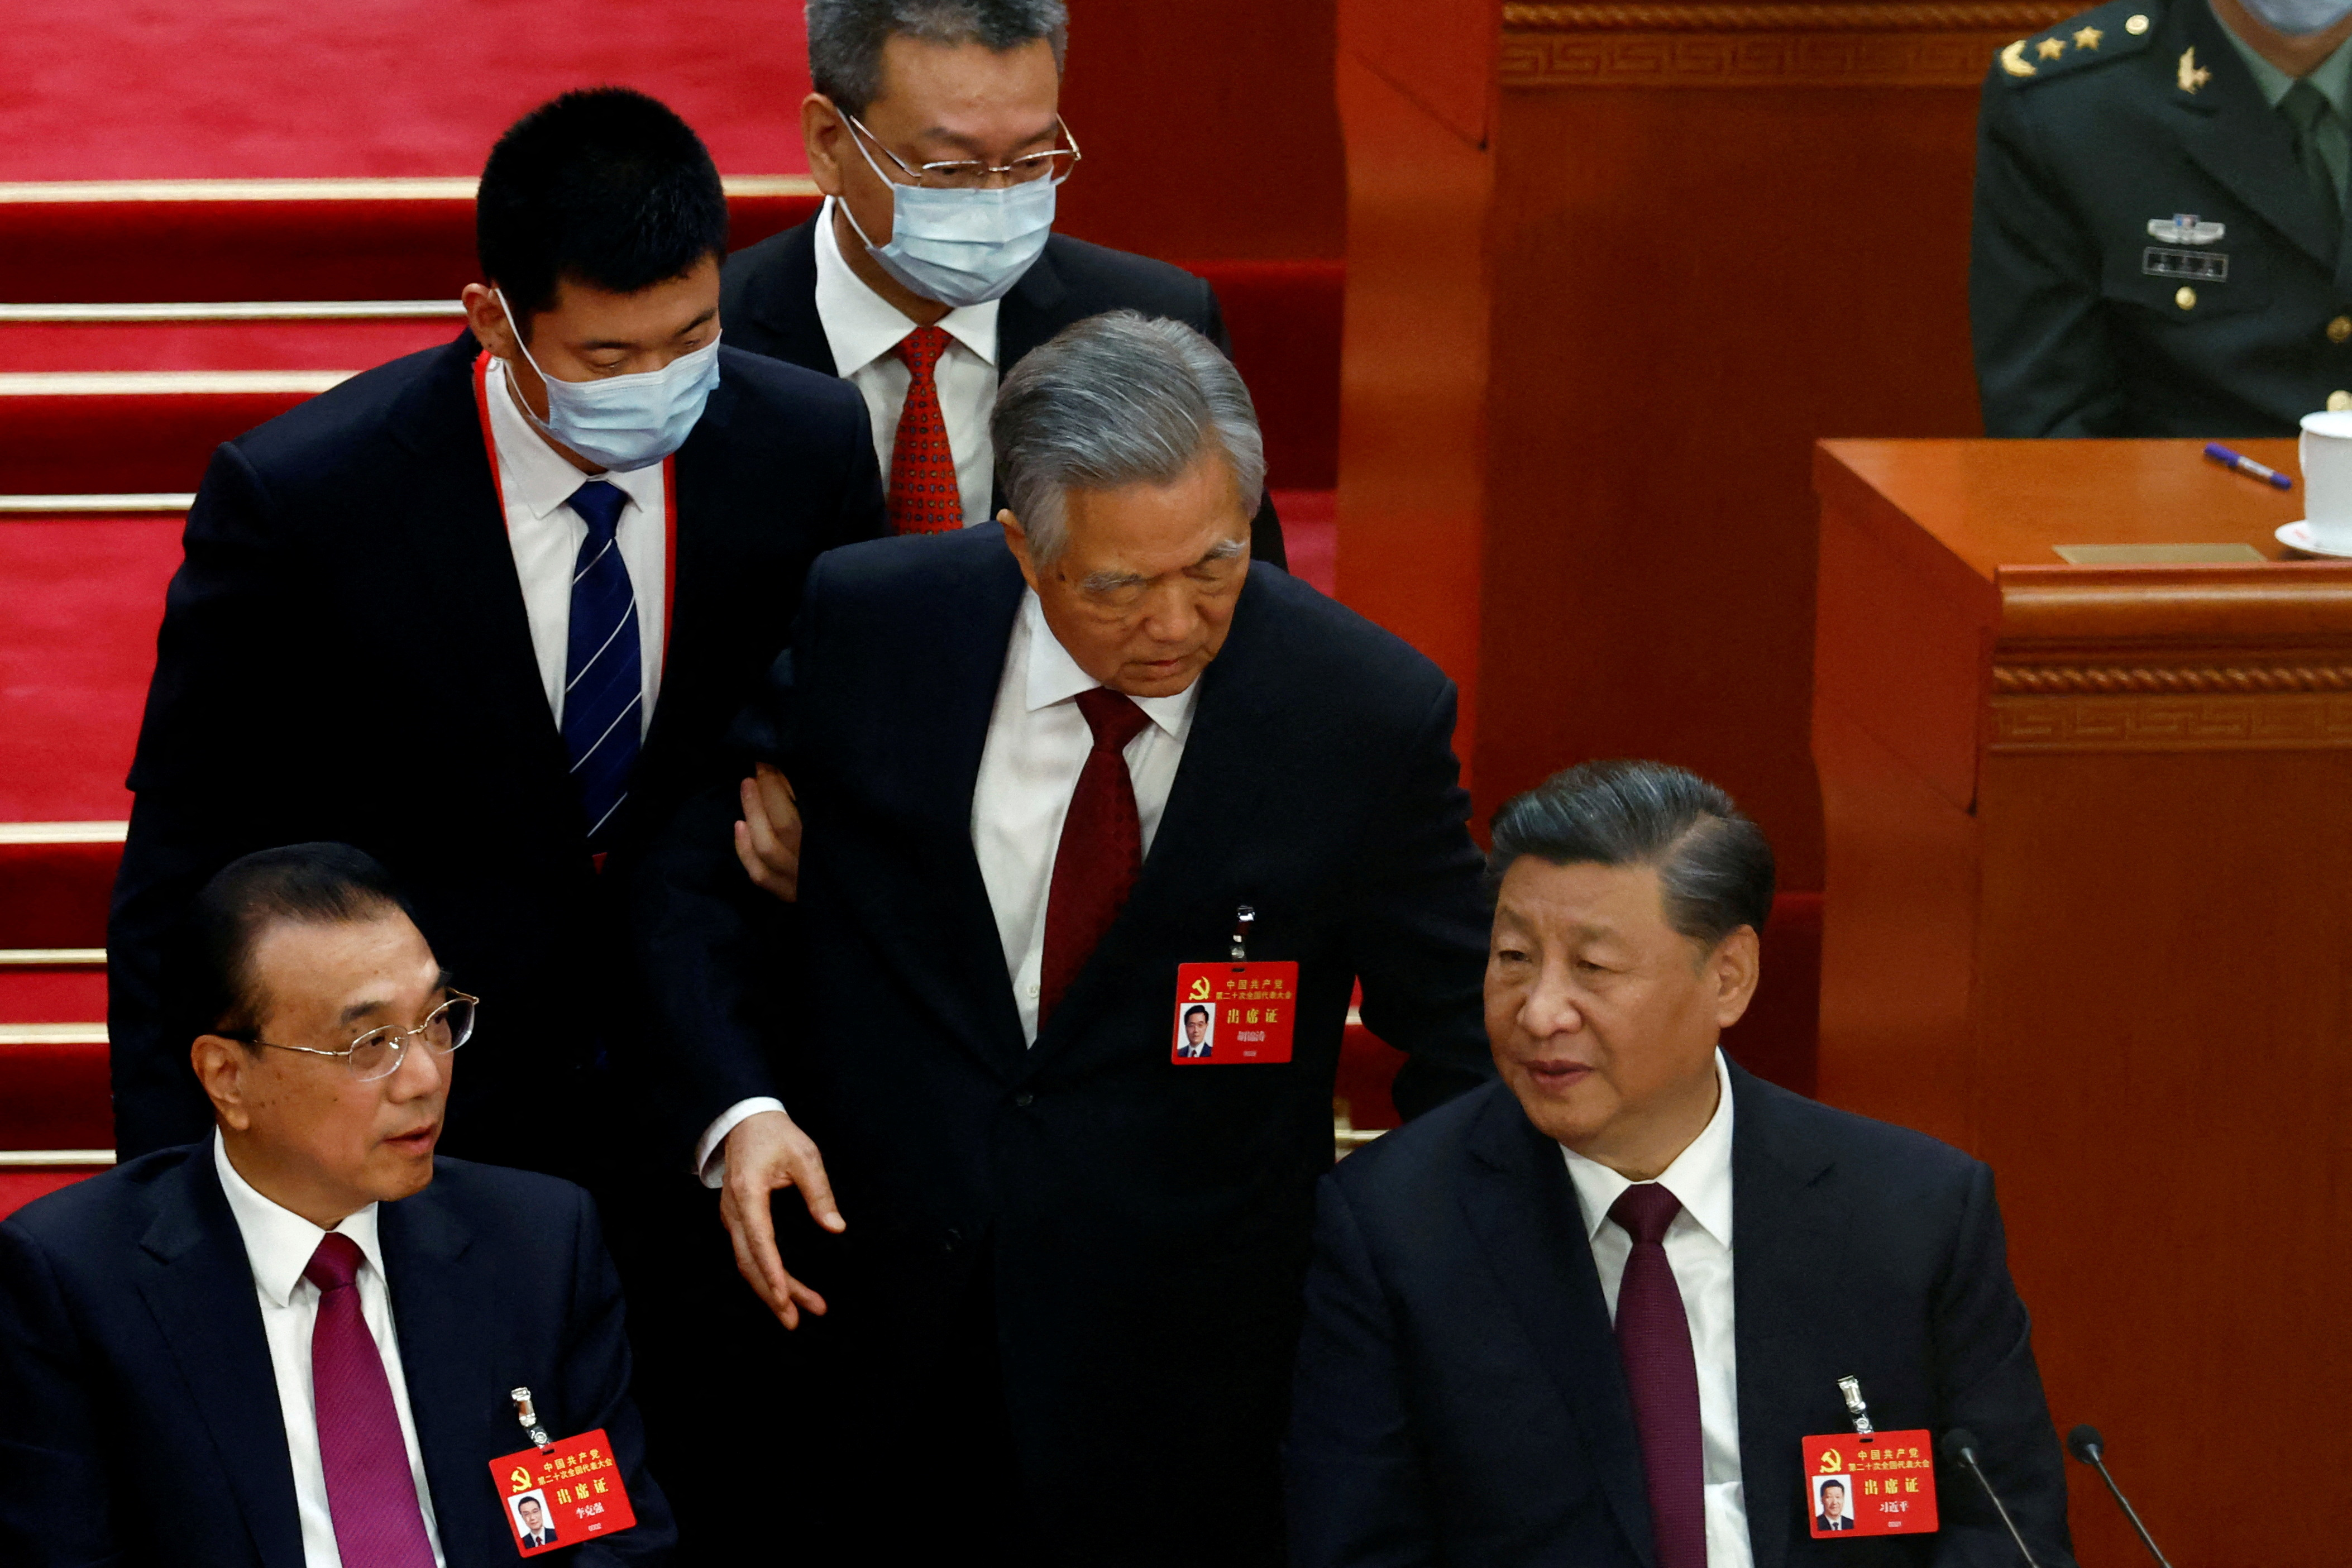 Hu eventually left the room, though he had a few brief words with Xi (REUTERS/Tingshu Wang/File Photo)